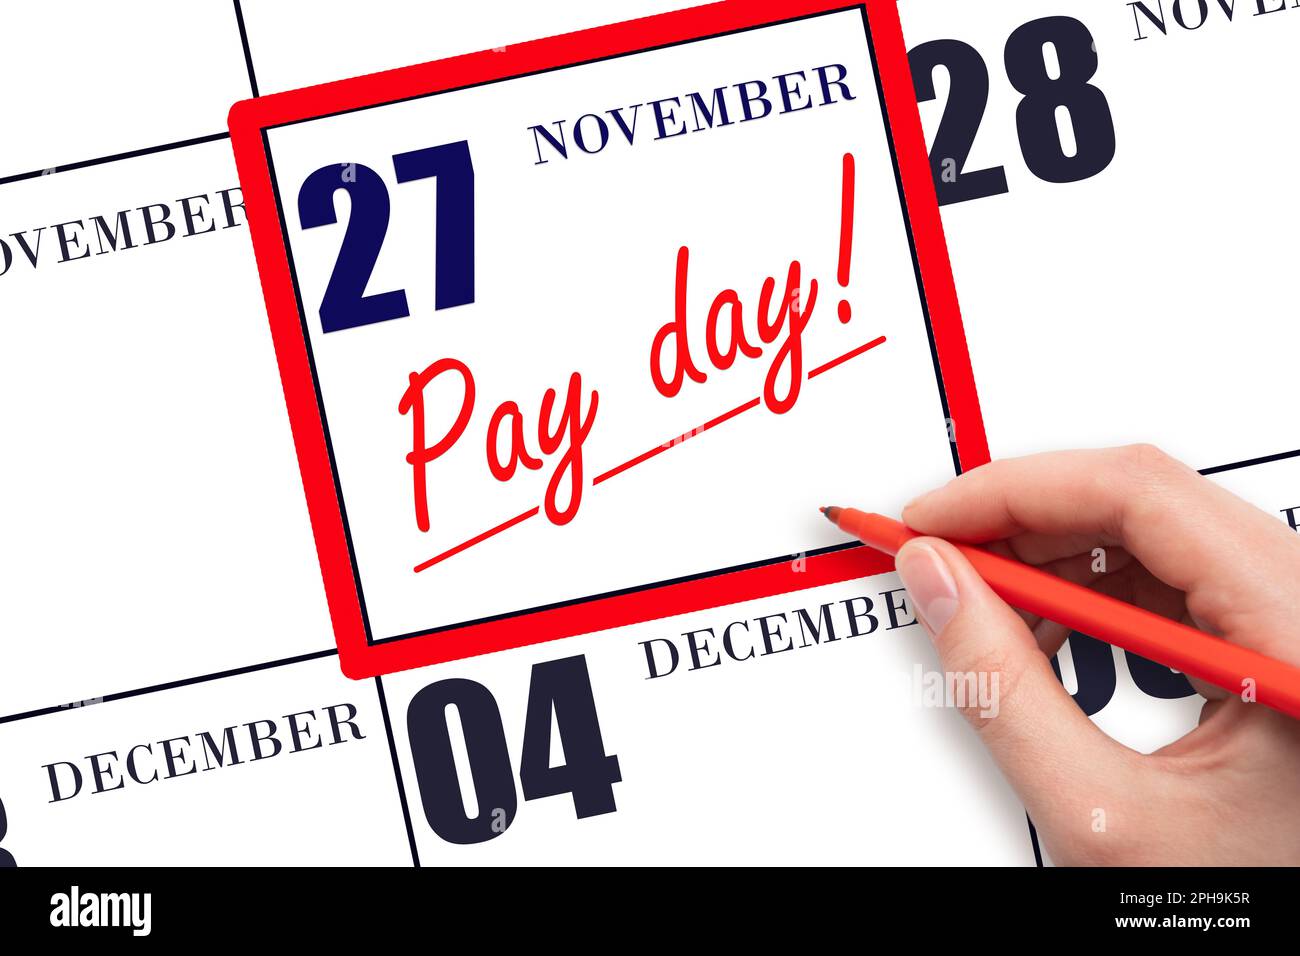 27th day of November. Hand writing text PAY DATE on calendar date November 27 and underline it. Payment due date.  Reminder concept of payment. Autumn Stock Photo